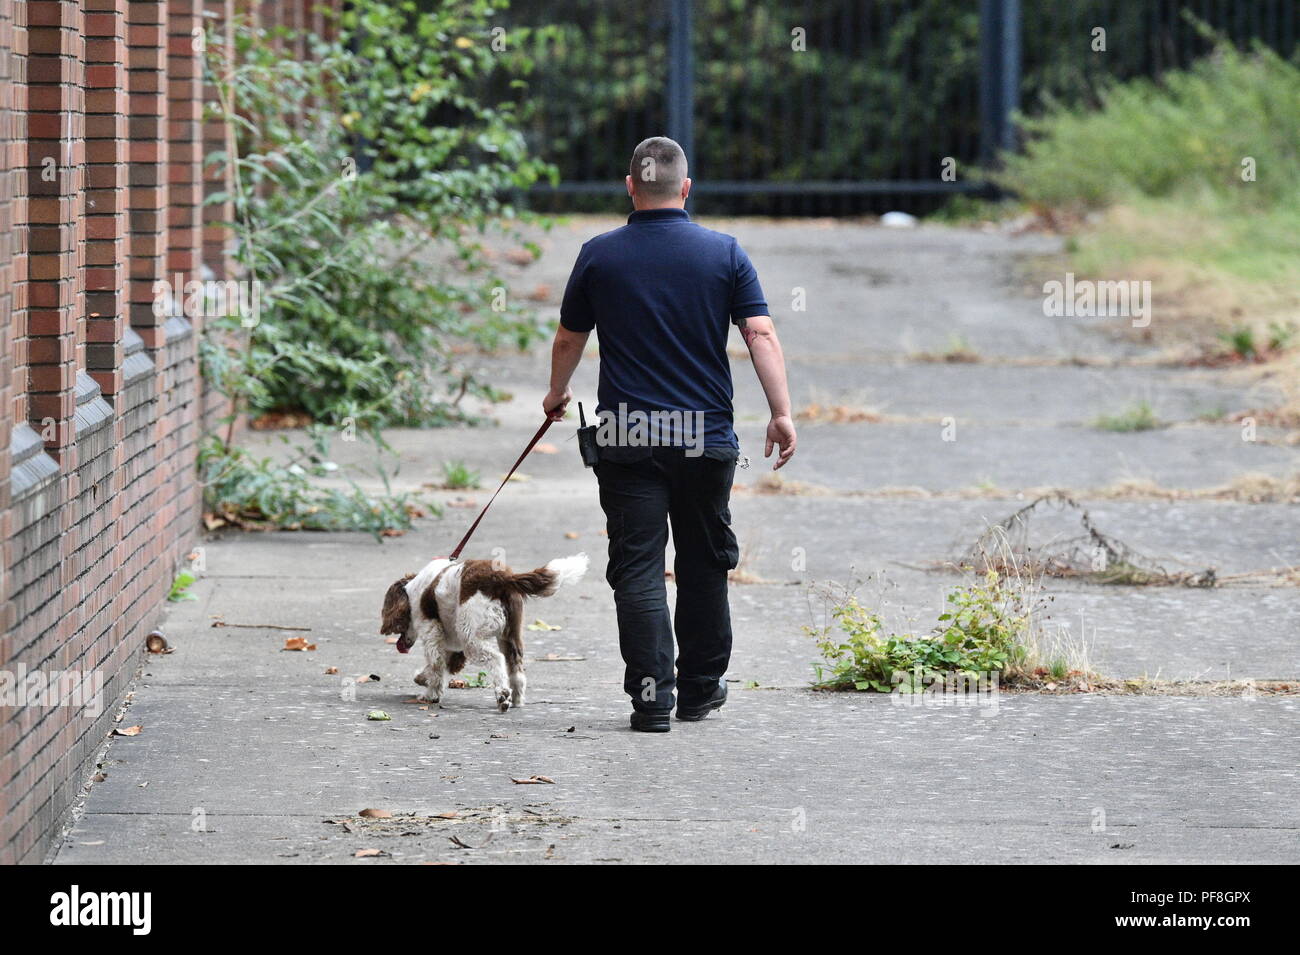 A G4S security guard with a sniffer dog patrols the exterior of HMP Birmingham after it emerged the government is taking over the privately-run prison after an inspection uncovered 'appalling' squalor and violence and found staff asleep or locked in offices. Stock Photo